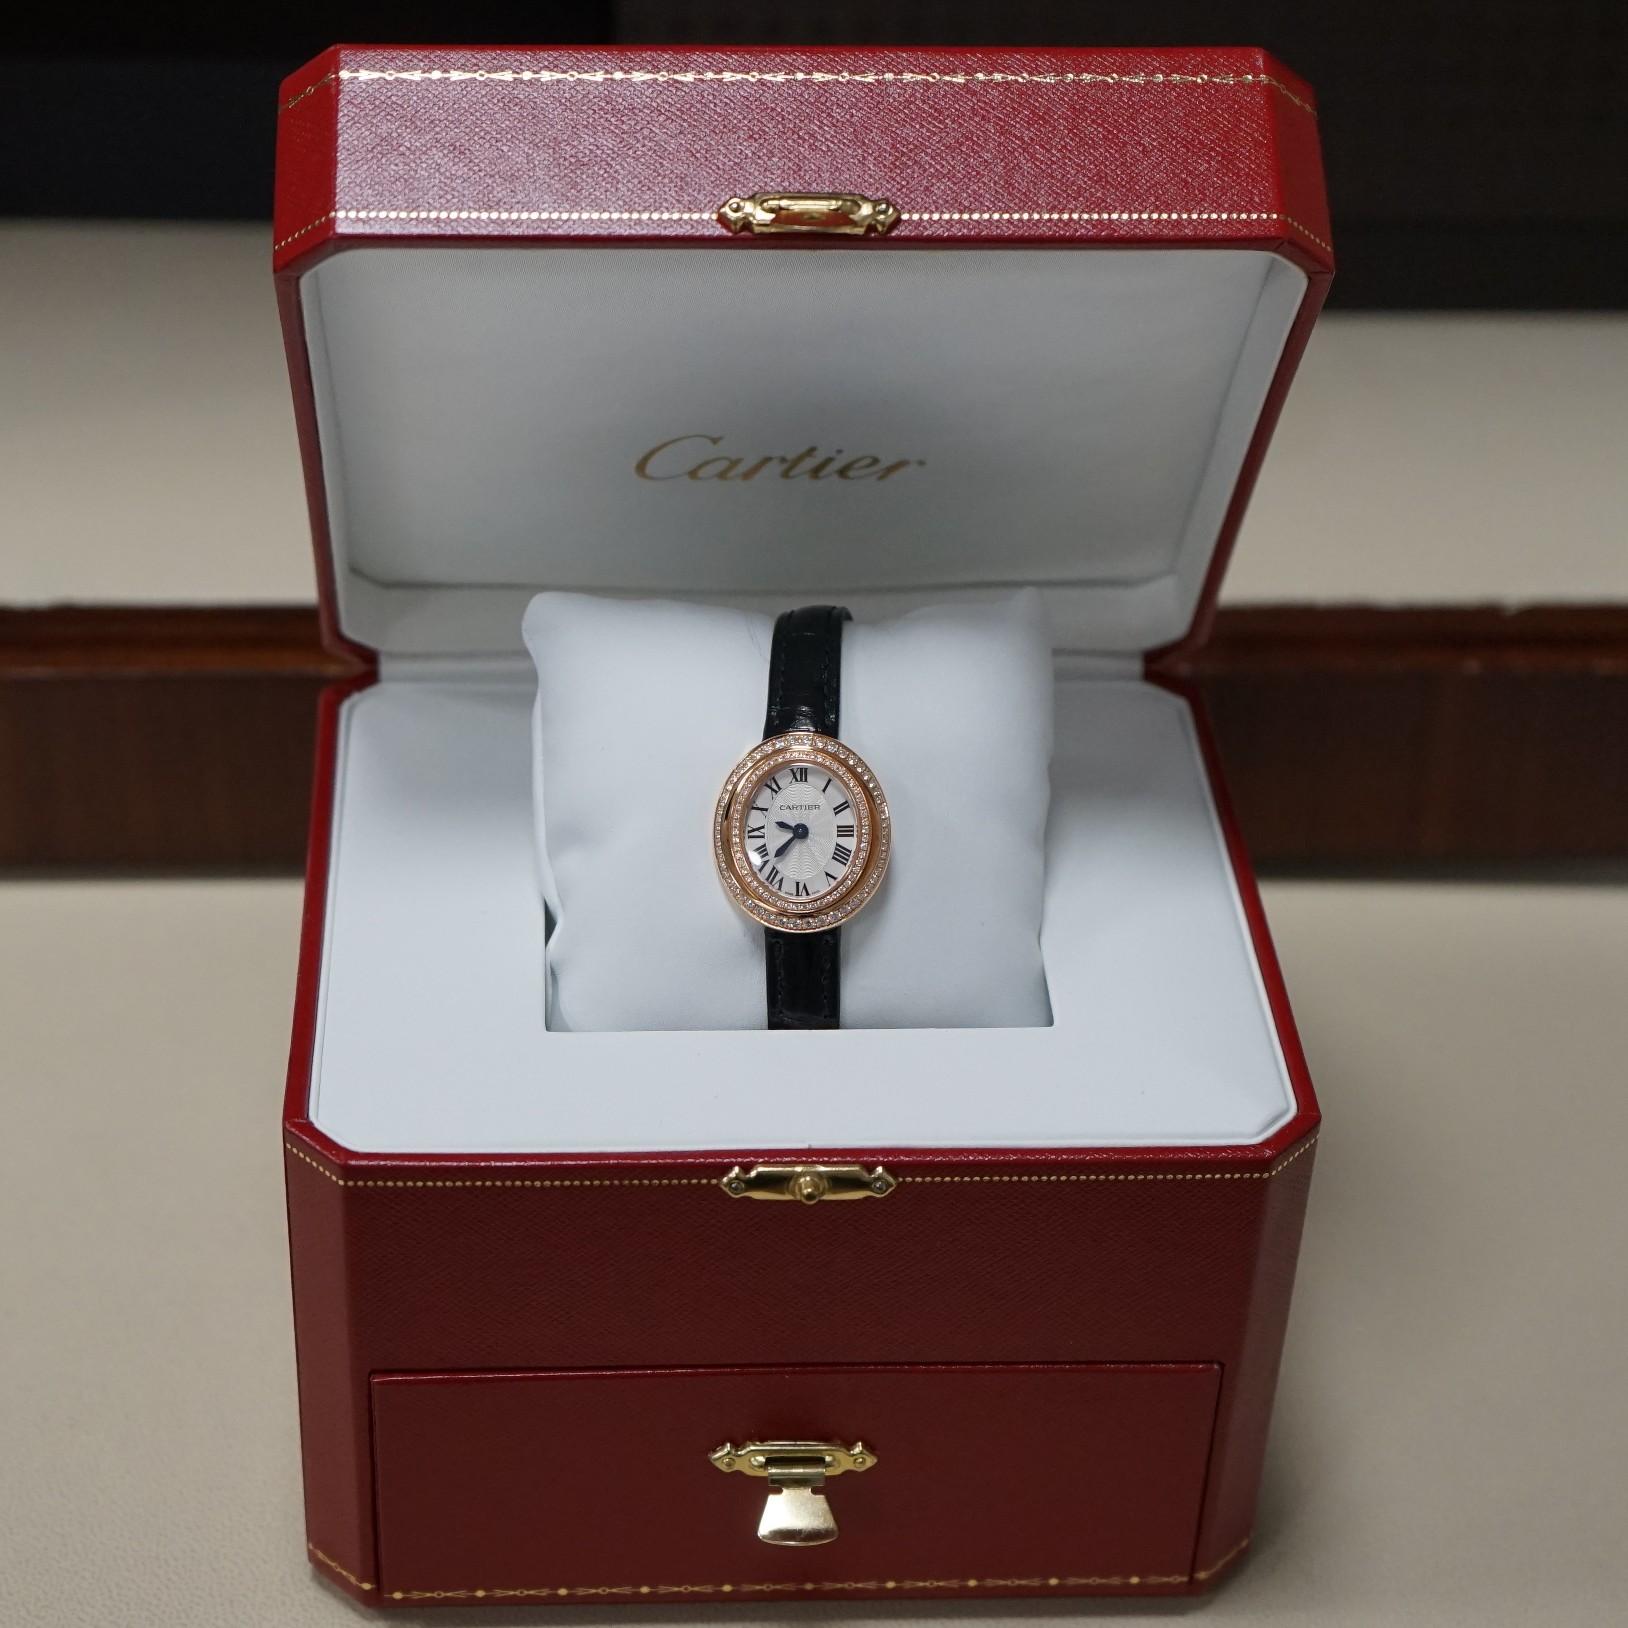 Pre- owned in excellent condition Cartier Hypnose WJHY003  in 18 Karat rose gold 30mm x 26.2mm  oval case, fixed set diamond bezel, silvered flinque sunray dial with blued steel sword shaped hands and Roman numerals hour markers, quartz movement,